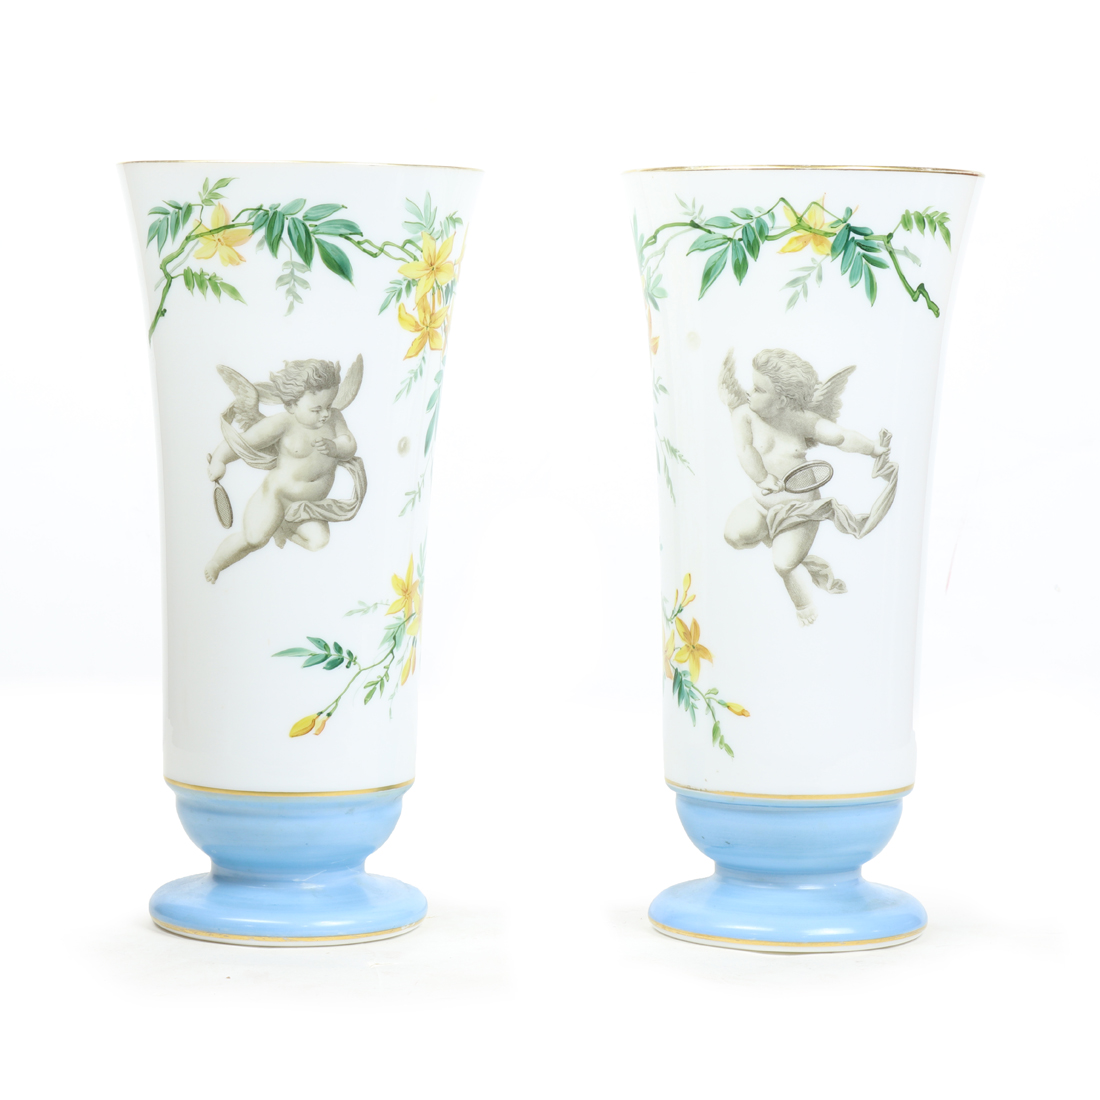 PAIR OF VICTORIAN ENAMELED GLASS